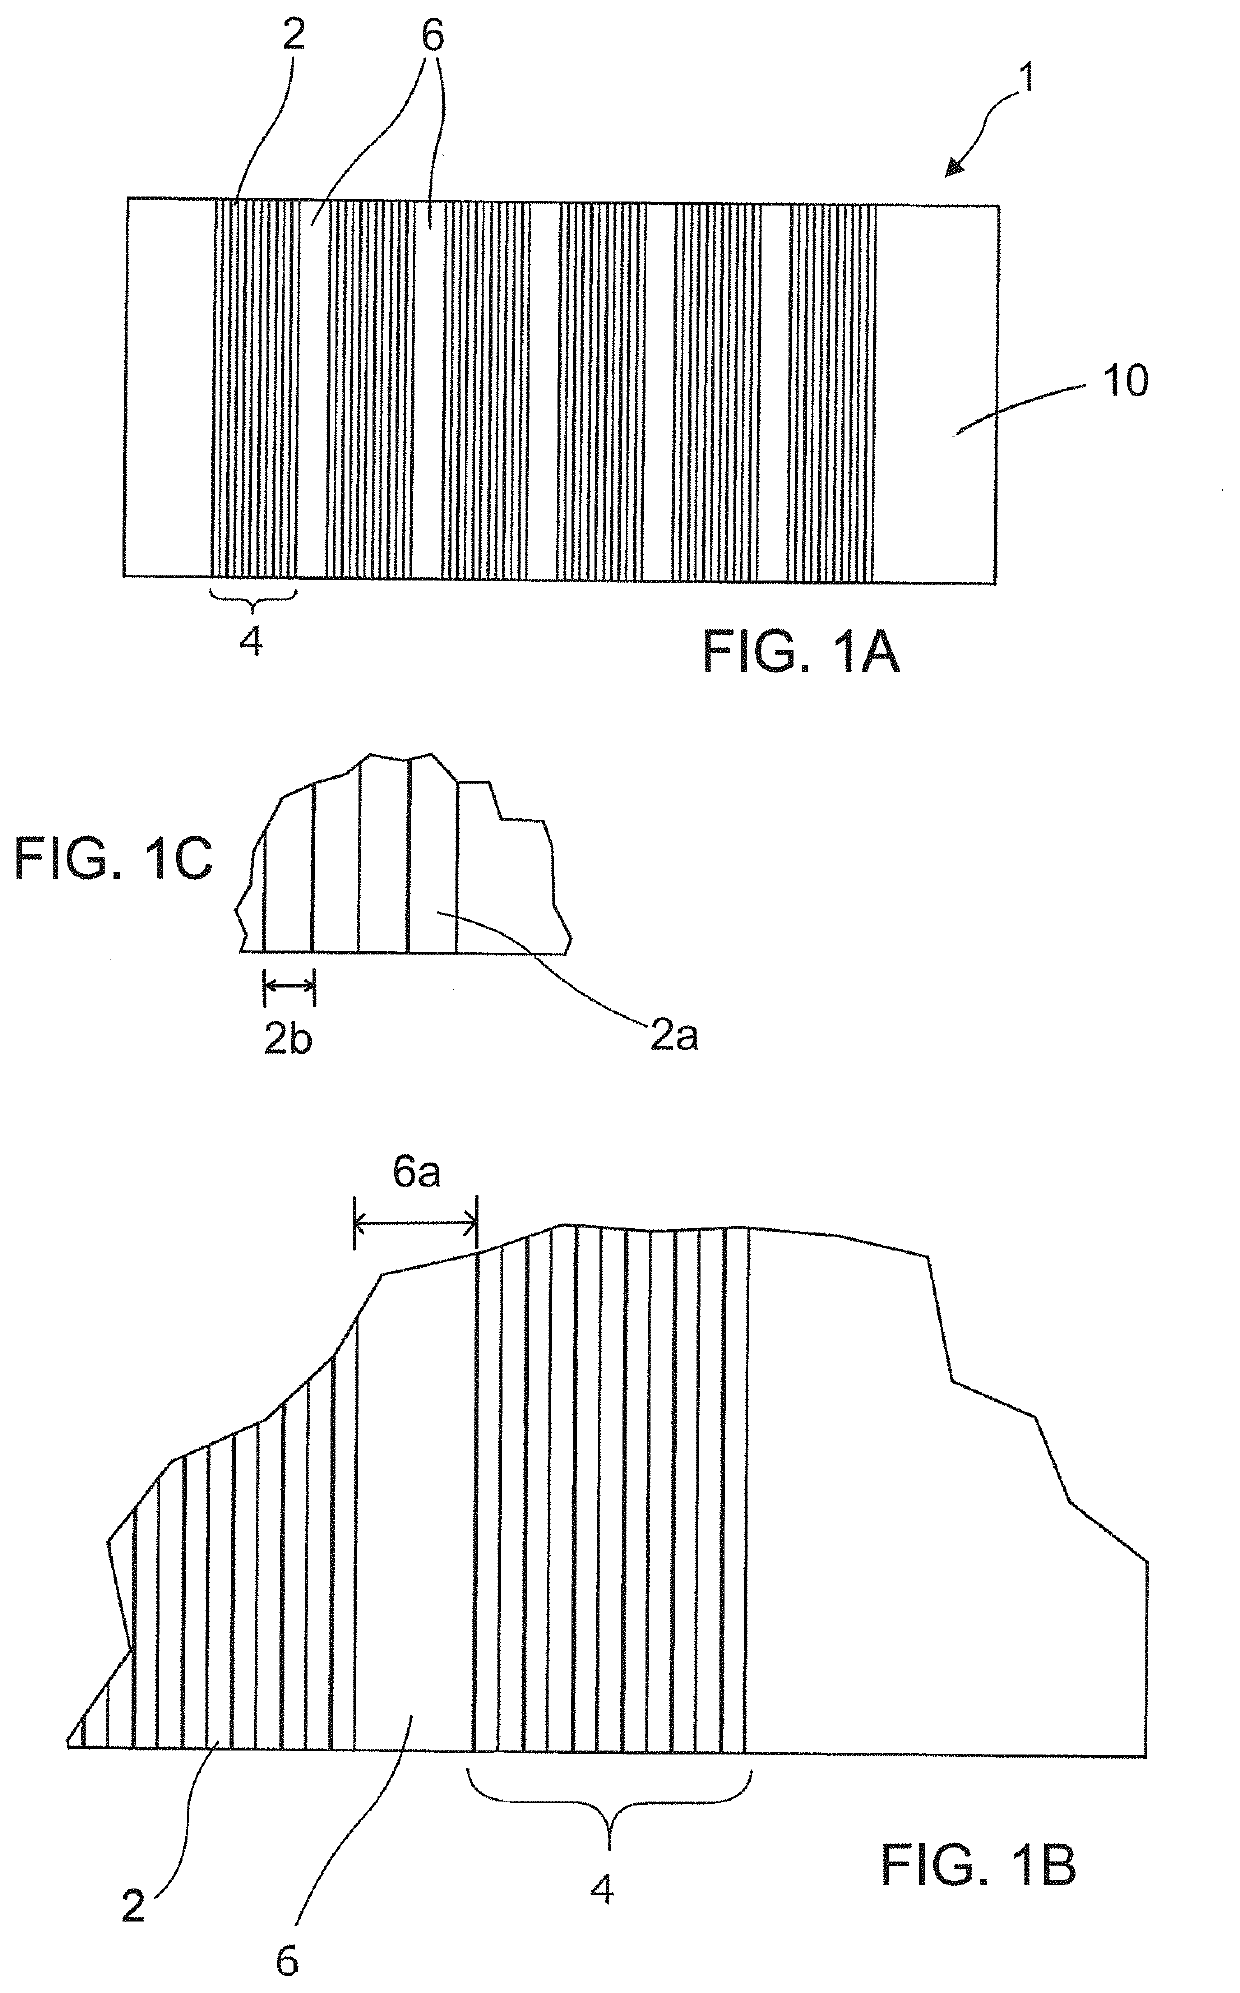 Building cladding compositions, systems, and methods for preparing and assembling same